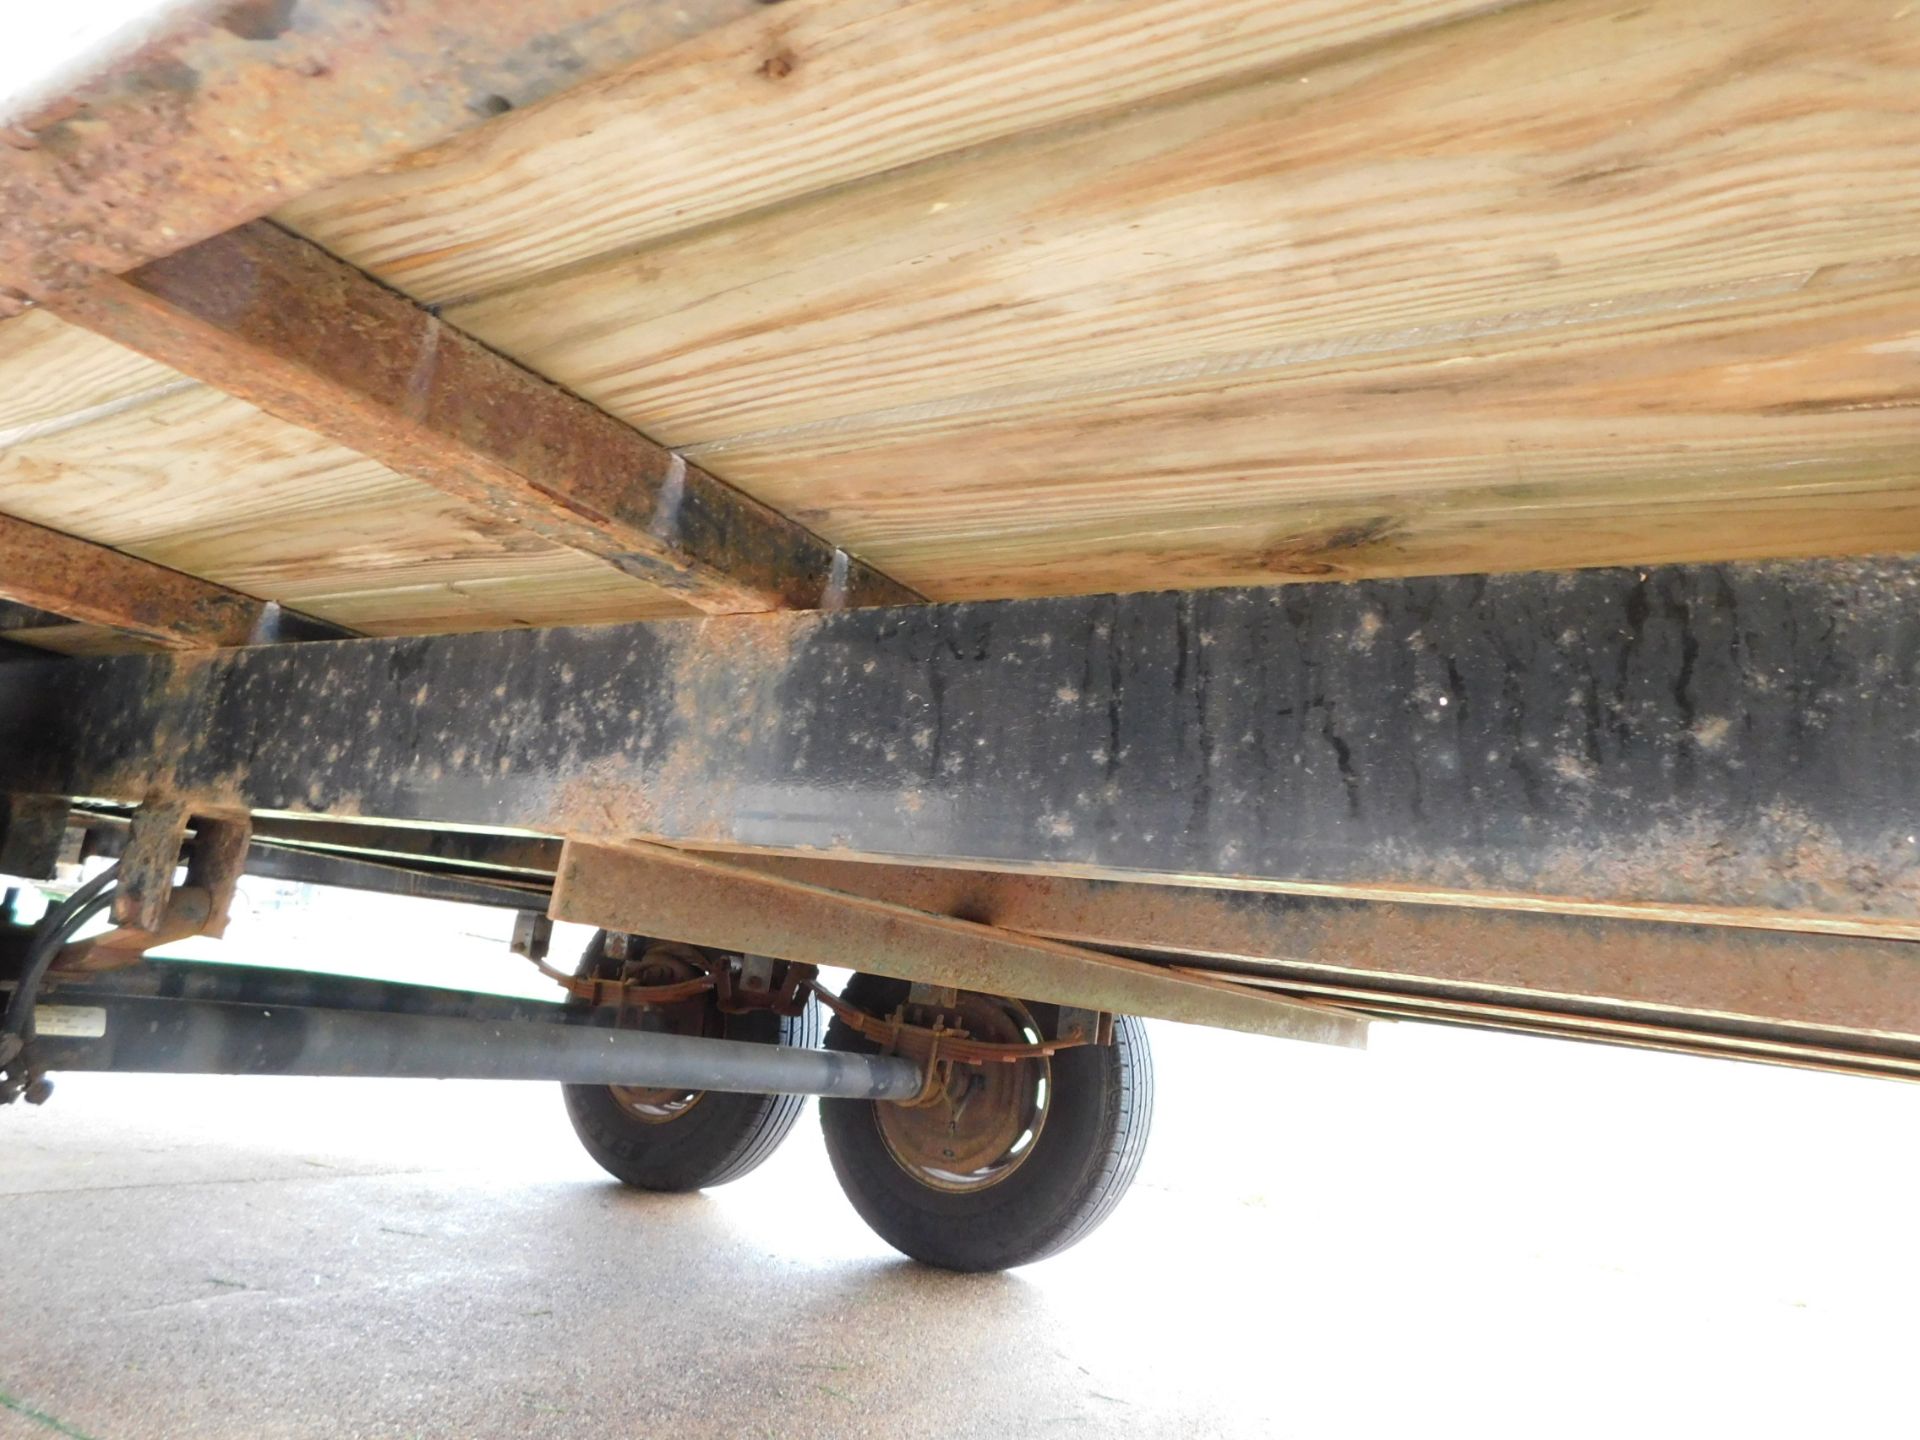 Sure-Trac Tandem Axle 20' Deck Over Trailer, Wood Deck, 102" Wide, D-Rings and Chain Rail - Image 11 of 15